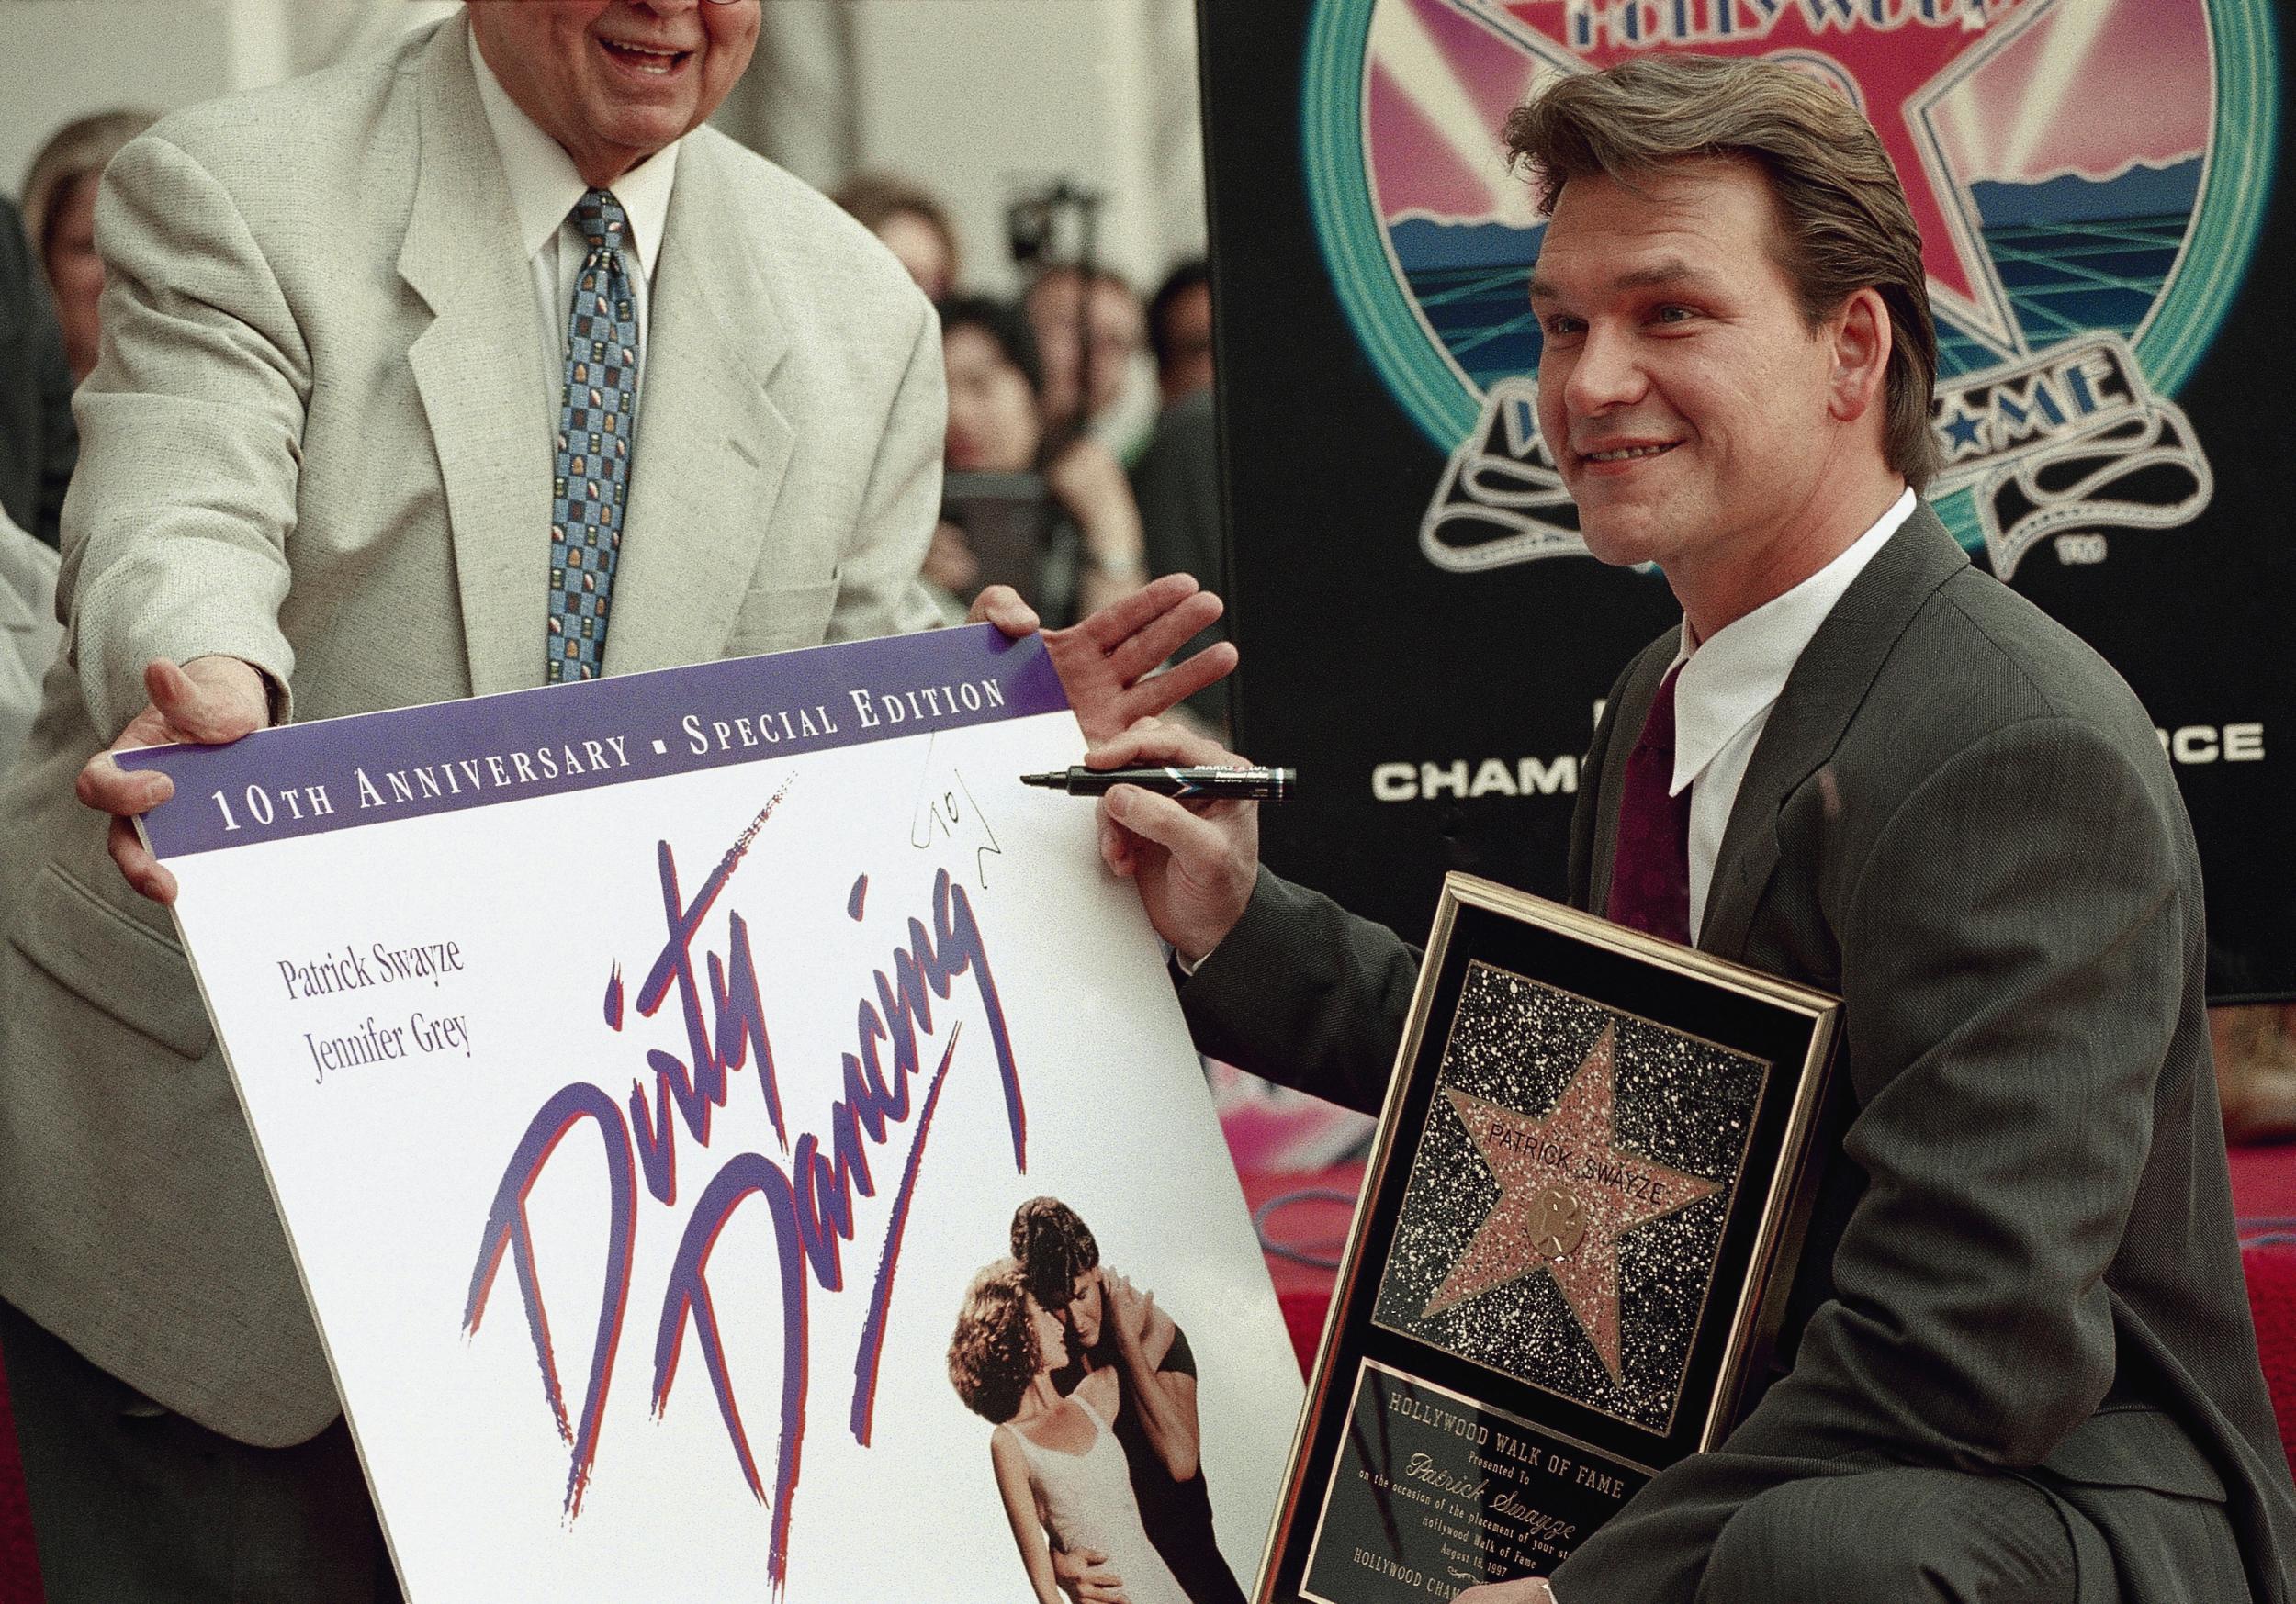 Patrick Swayze after the unveiling of his star on the Hollywood Walk of Fame on 18 August 1997. The event coincided with the 10-year anniversary of the release of 'Dirty Dancing'.